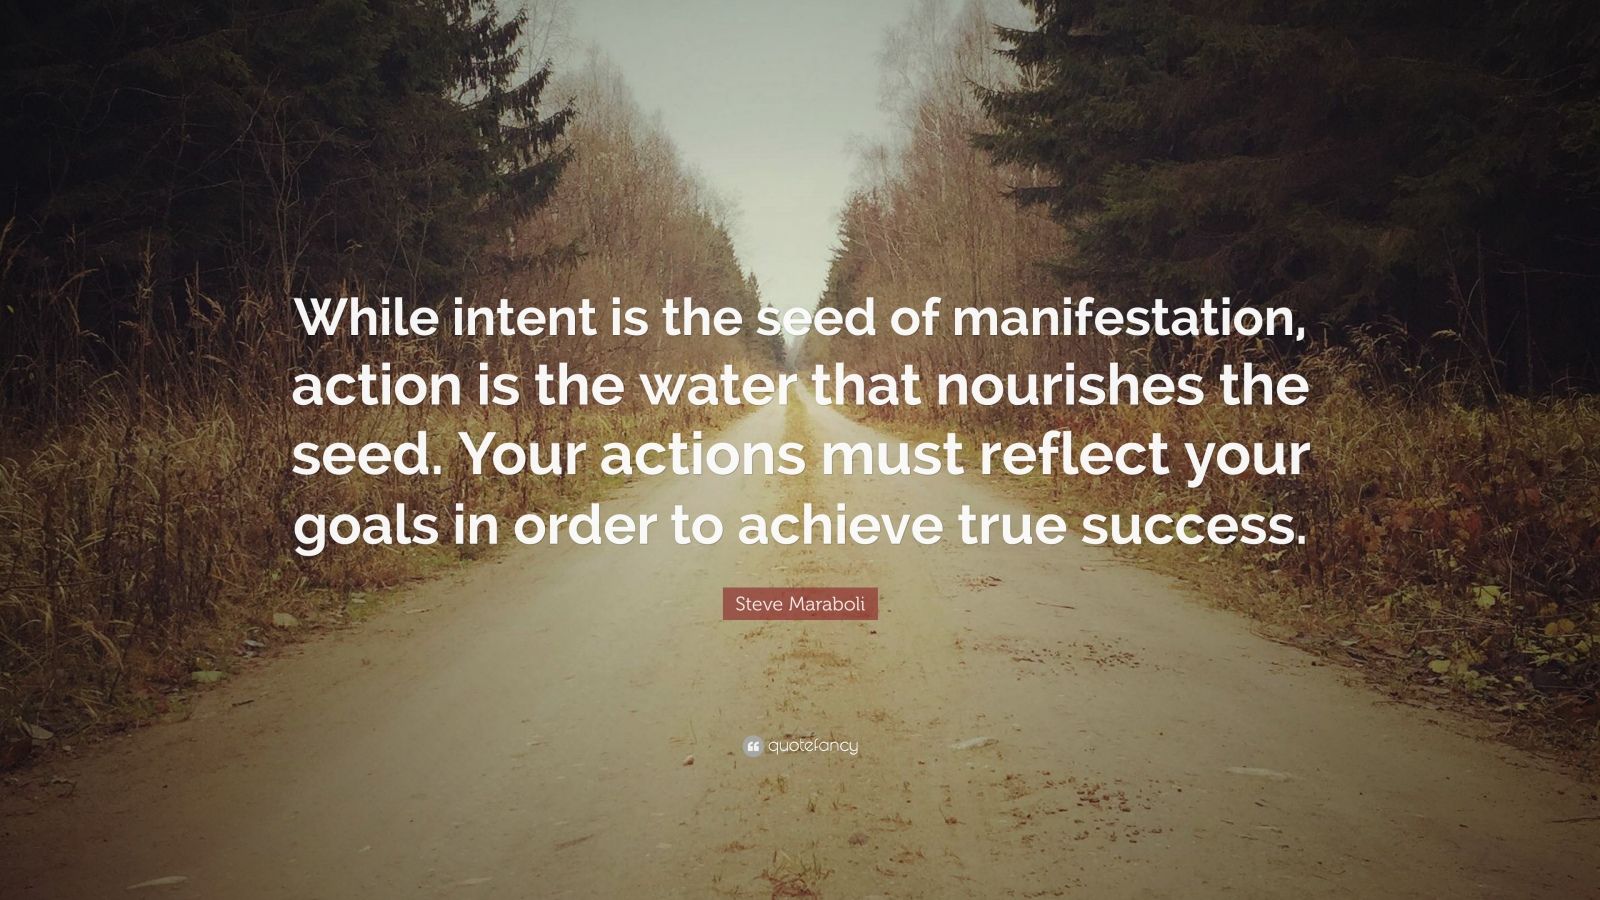 Steve Maraboli Quote: “While intent is the seed of manifestation